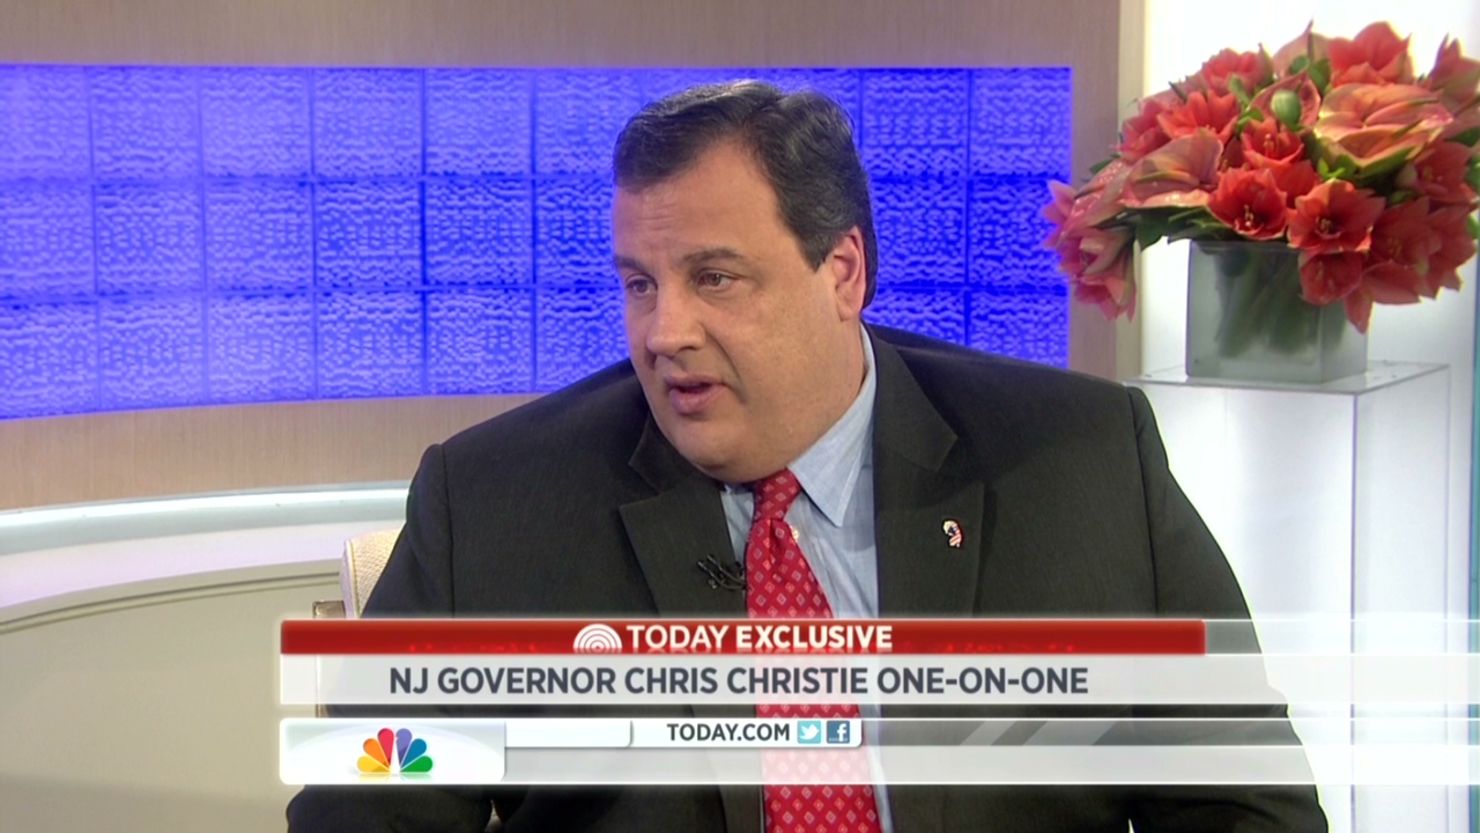 On Tuesday, Gov. Chris Christie said marriage "is too serious to be treated like a political football."